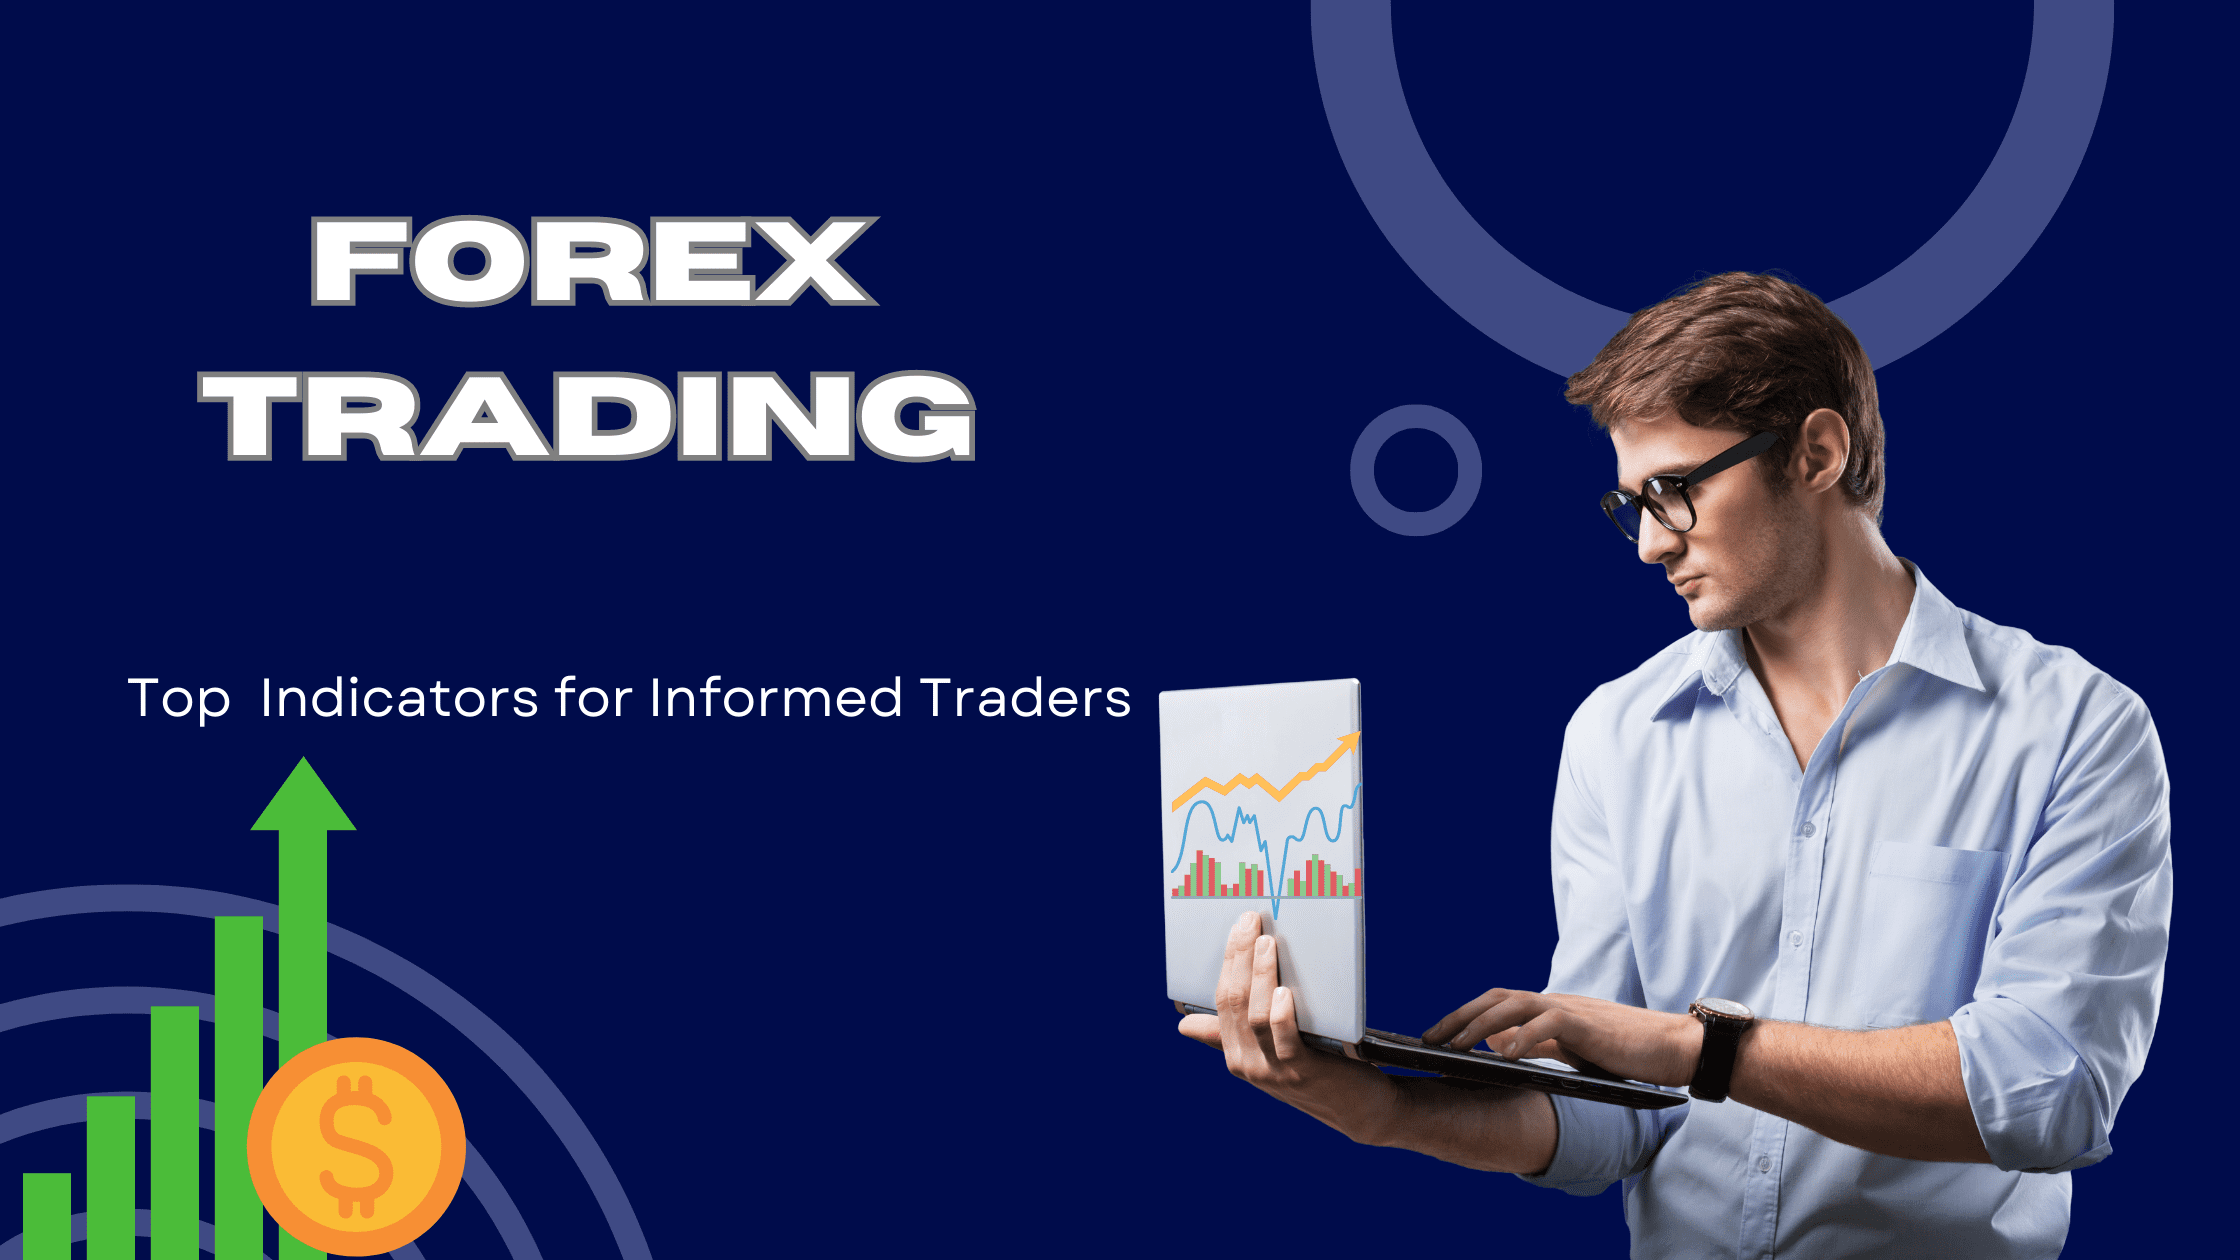 Forex Trading: Top Indicators for Informed Traders